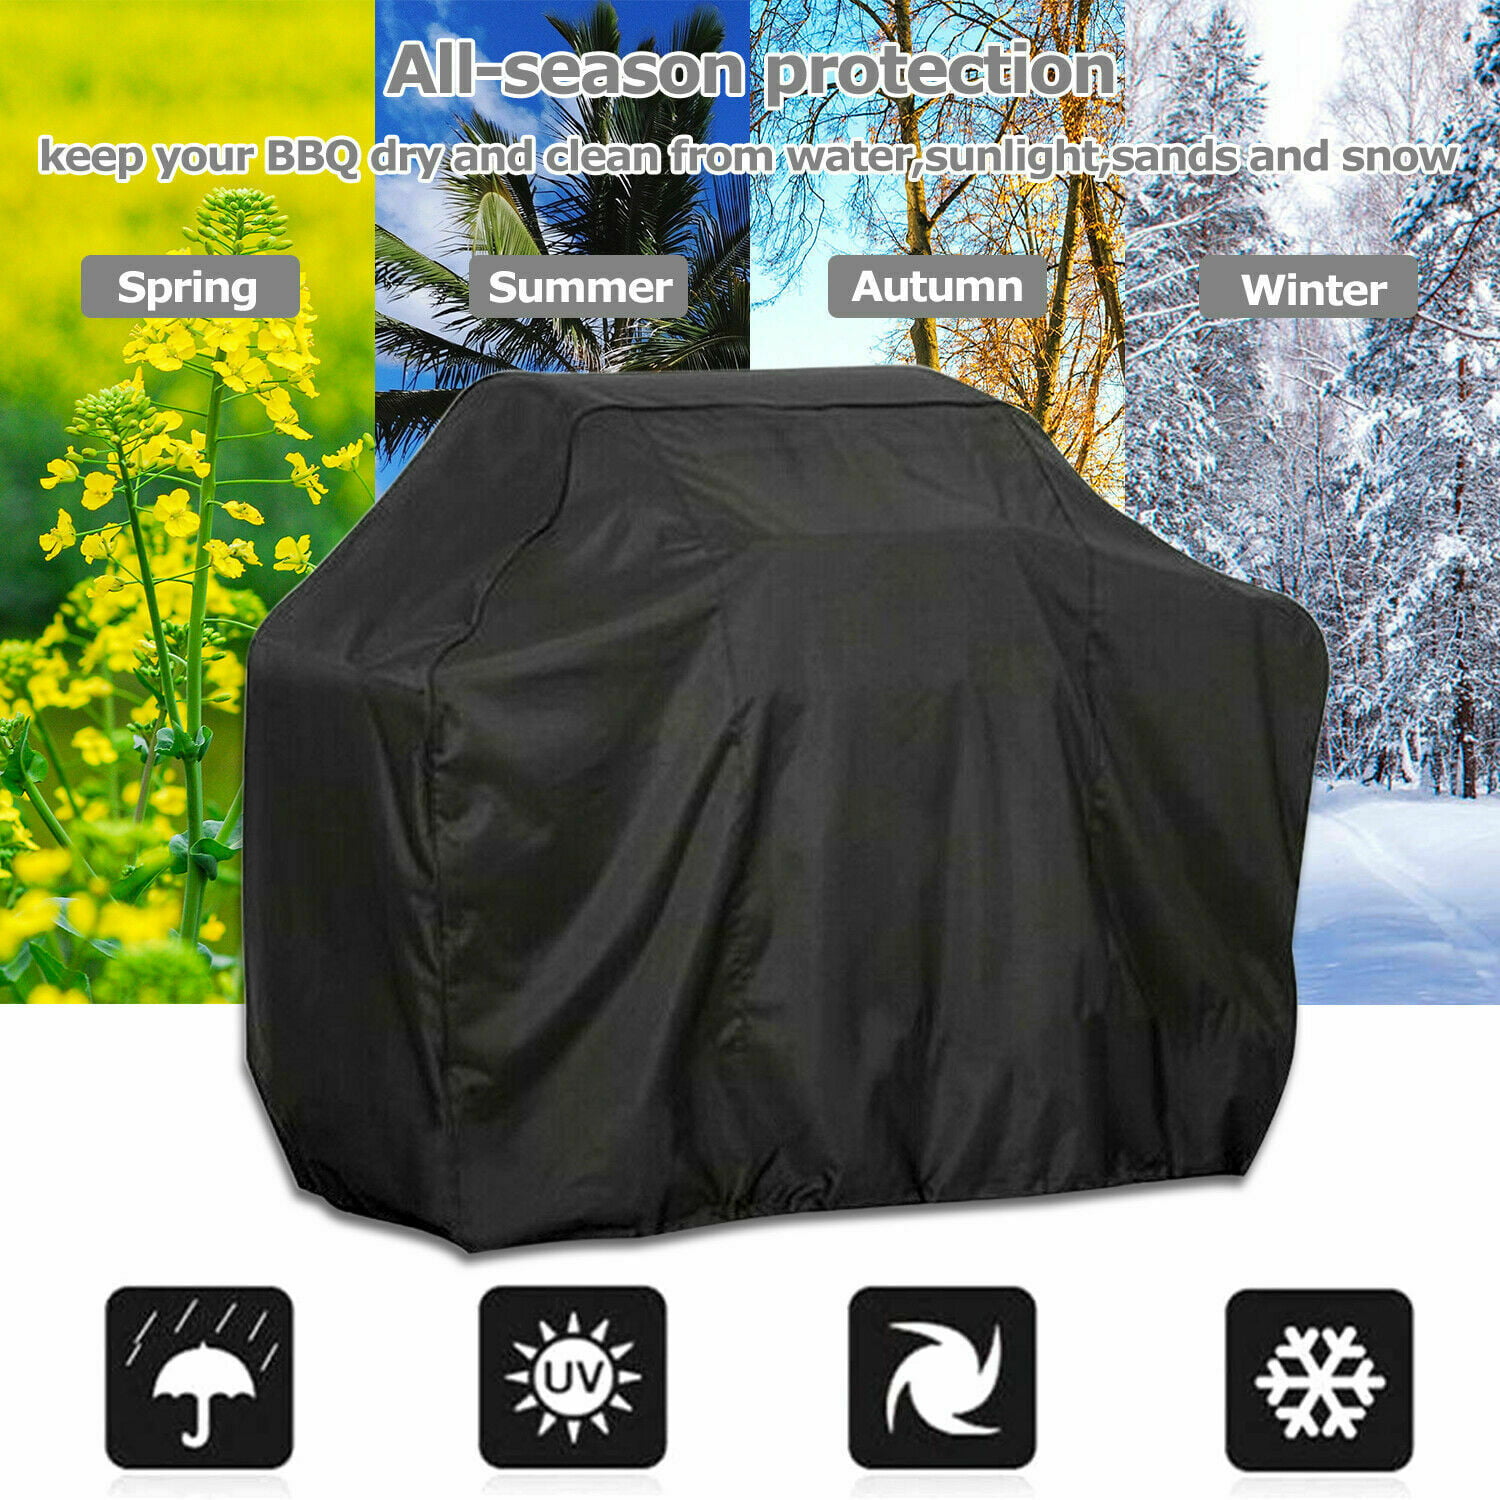 BBQ Gas Grill Cover 67 Inch Barbecue Waterproof Outdoor Heavy Duty UV Protection 